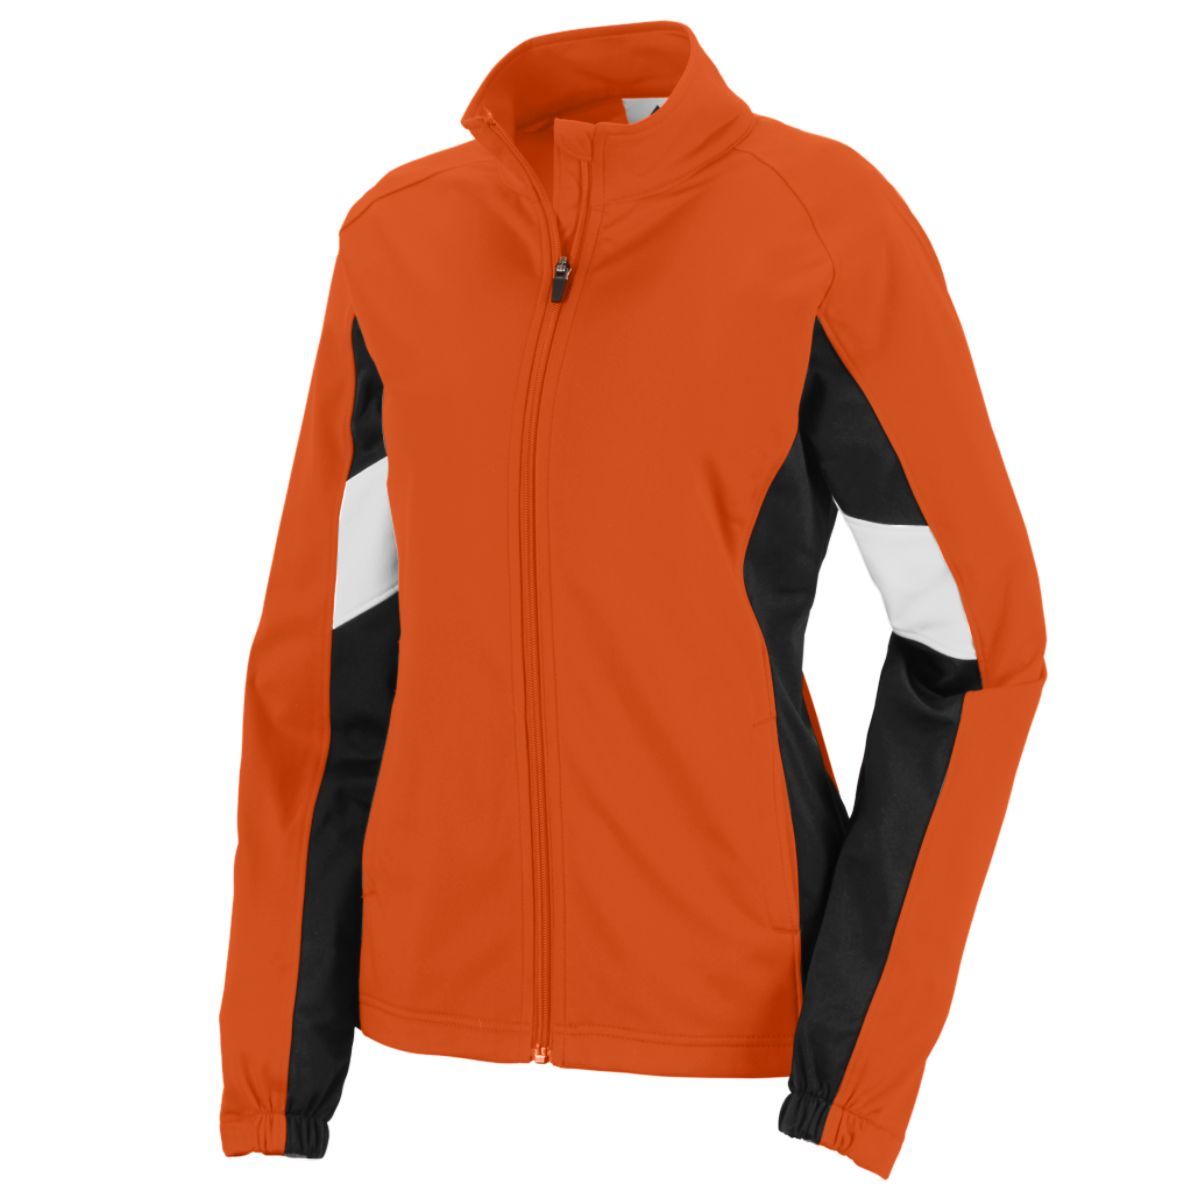 Augusta Sportswear Ladies Tour De Force Jacket in Orange/Black/White  -Part of the Ladies, Ladies-Jacket, Augusta-Products, Outerwear product lines at KanaleyCreations.com